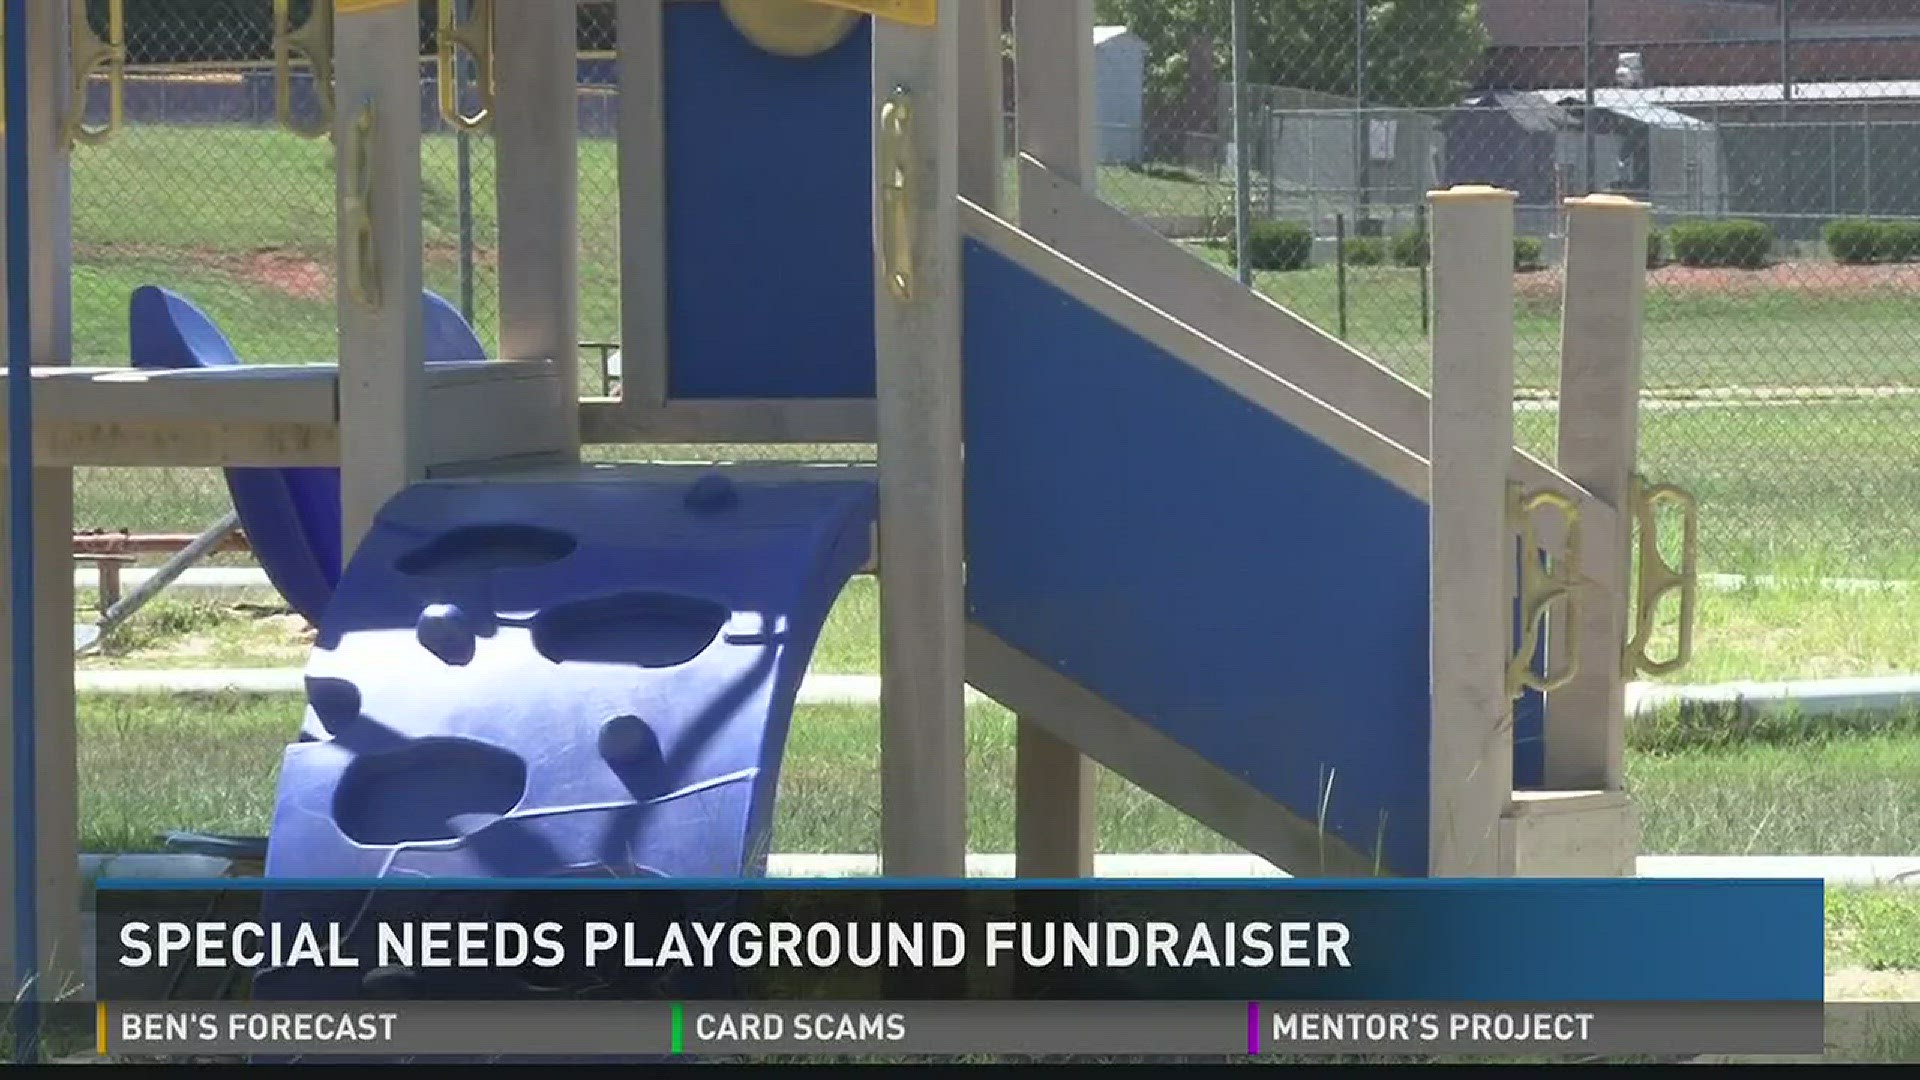 Fundraiser being held for special needs playground